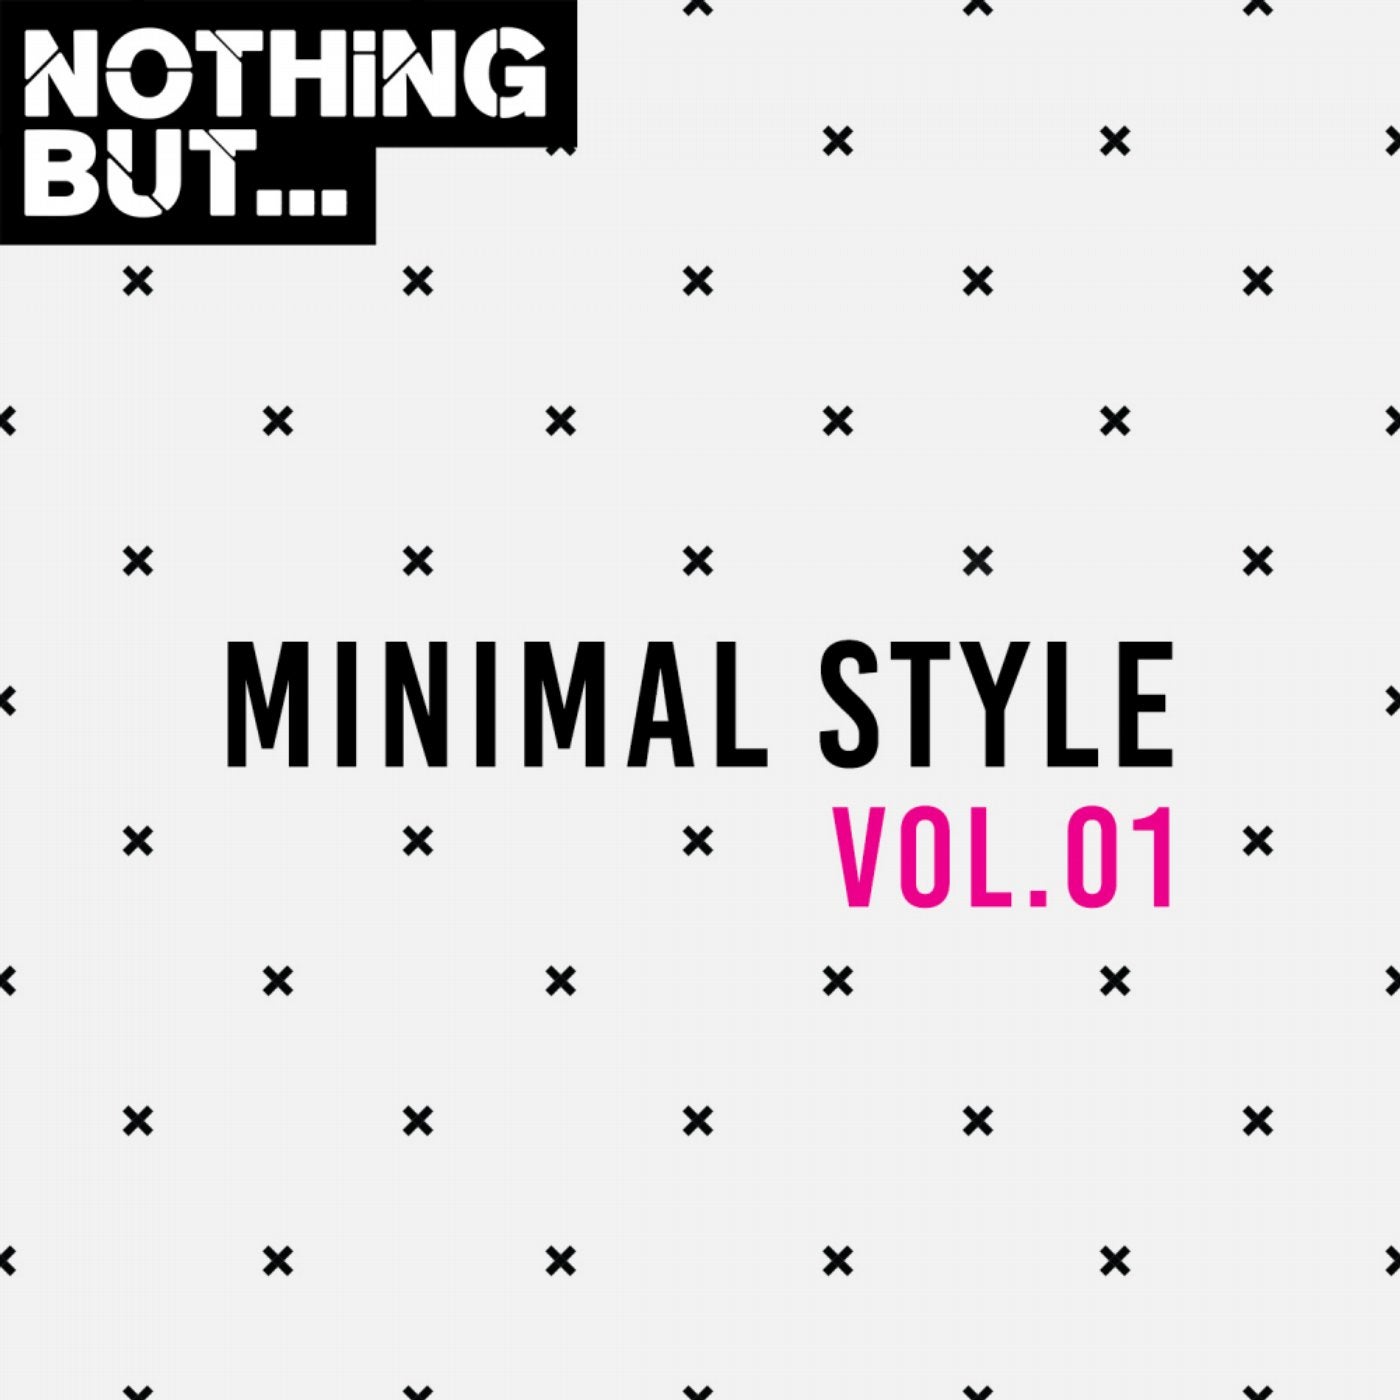 Nothing But... Minimal Style, Vol. 01